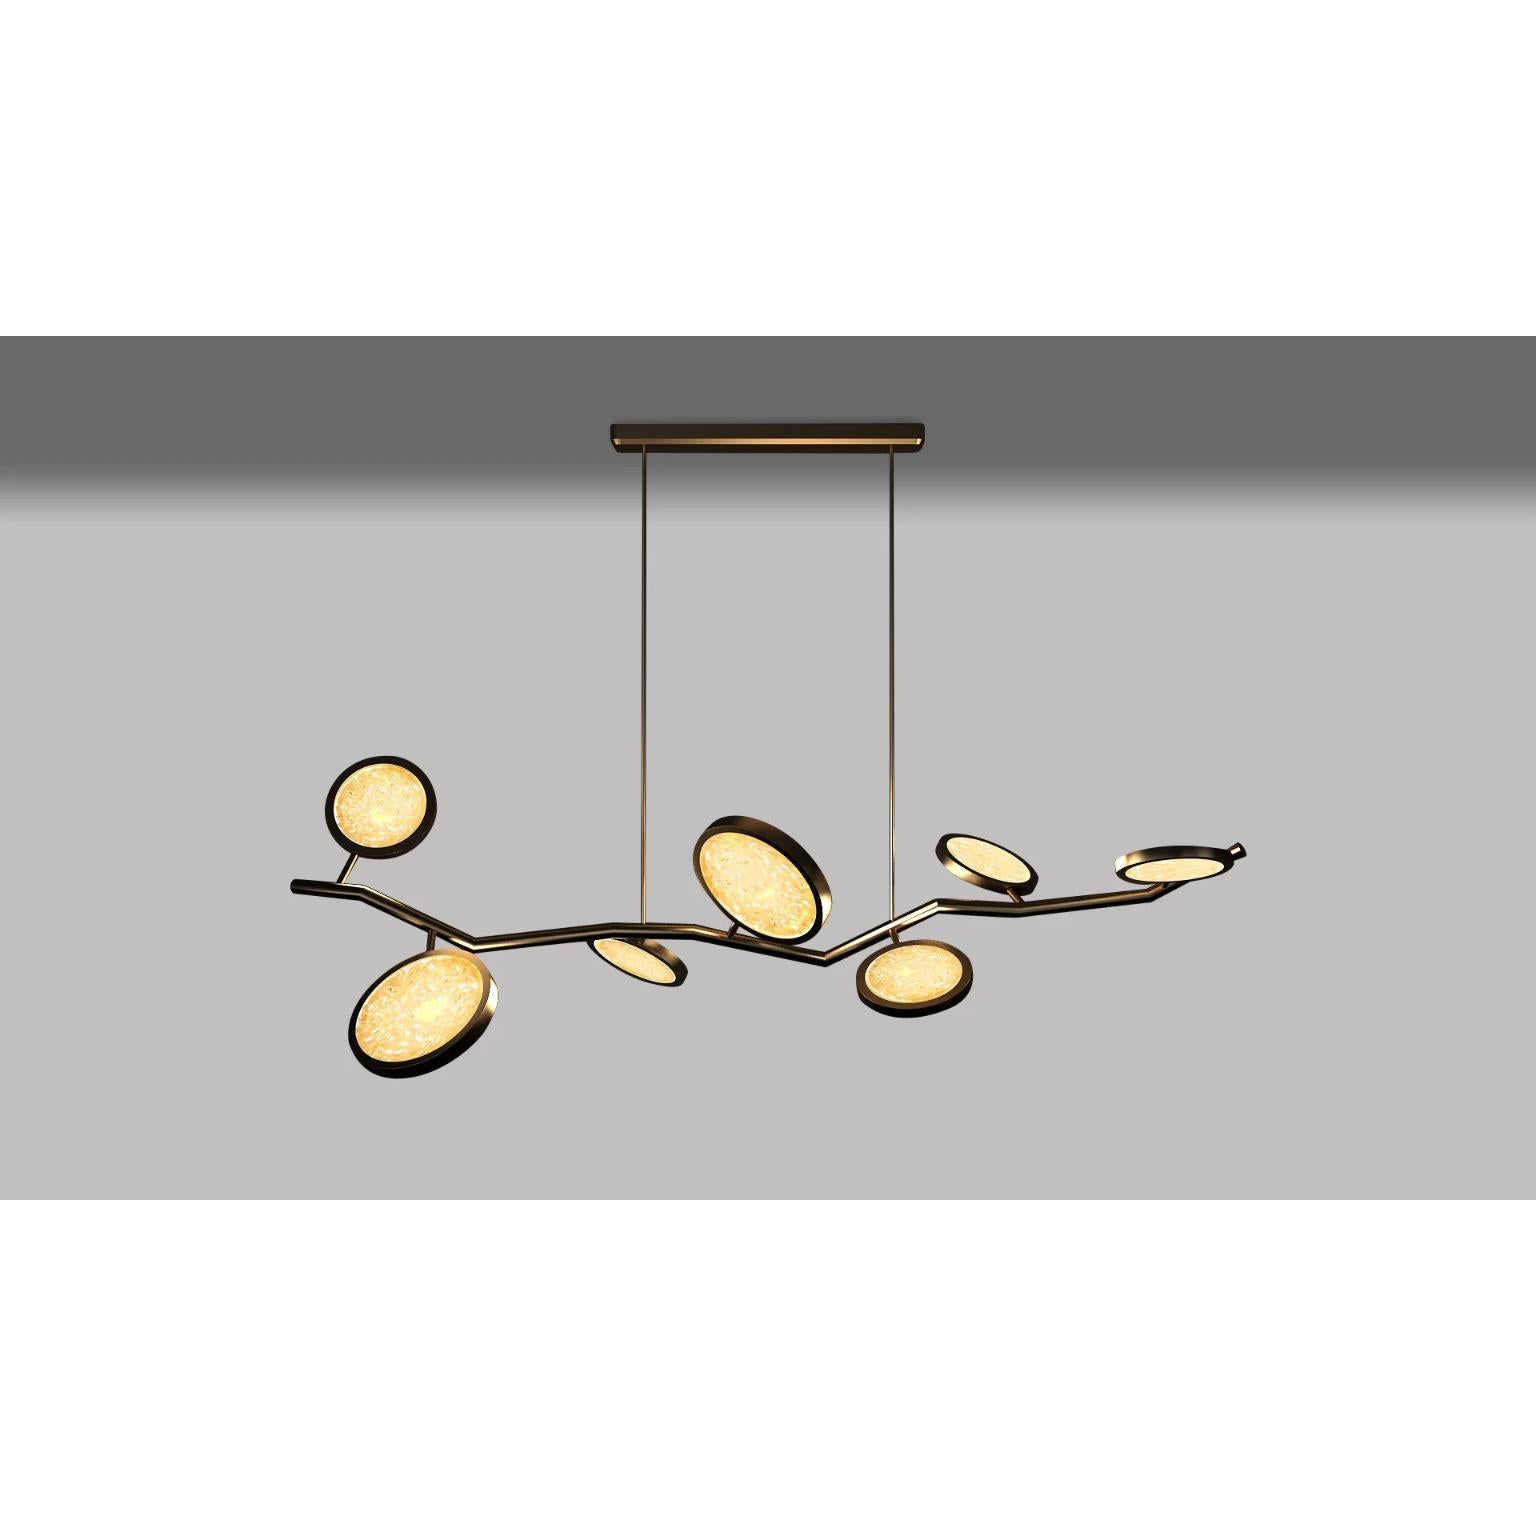 Island Circles Small Pendant Lamp by Dainte
Dimensions: D 44.5 x W 134 x H 79 cm.
Materials: Glass and brass. 

An extraordinary Island Pendant Circles, featuring seven circles, a combination of brass with glistening textured glass, when combined,